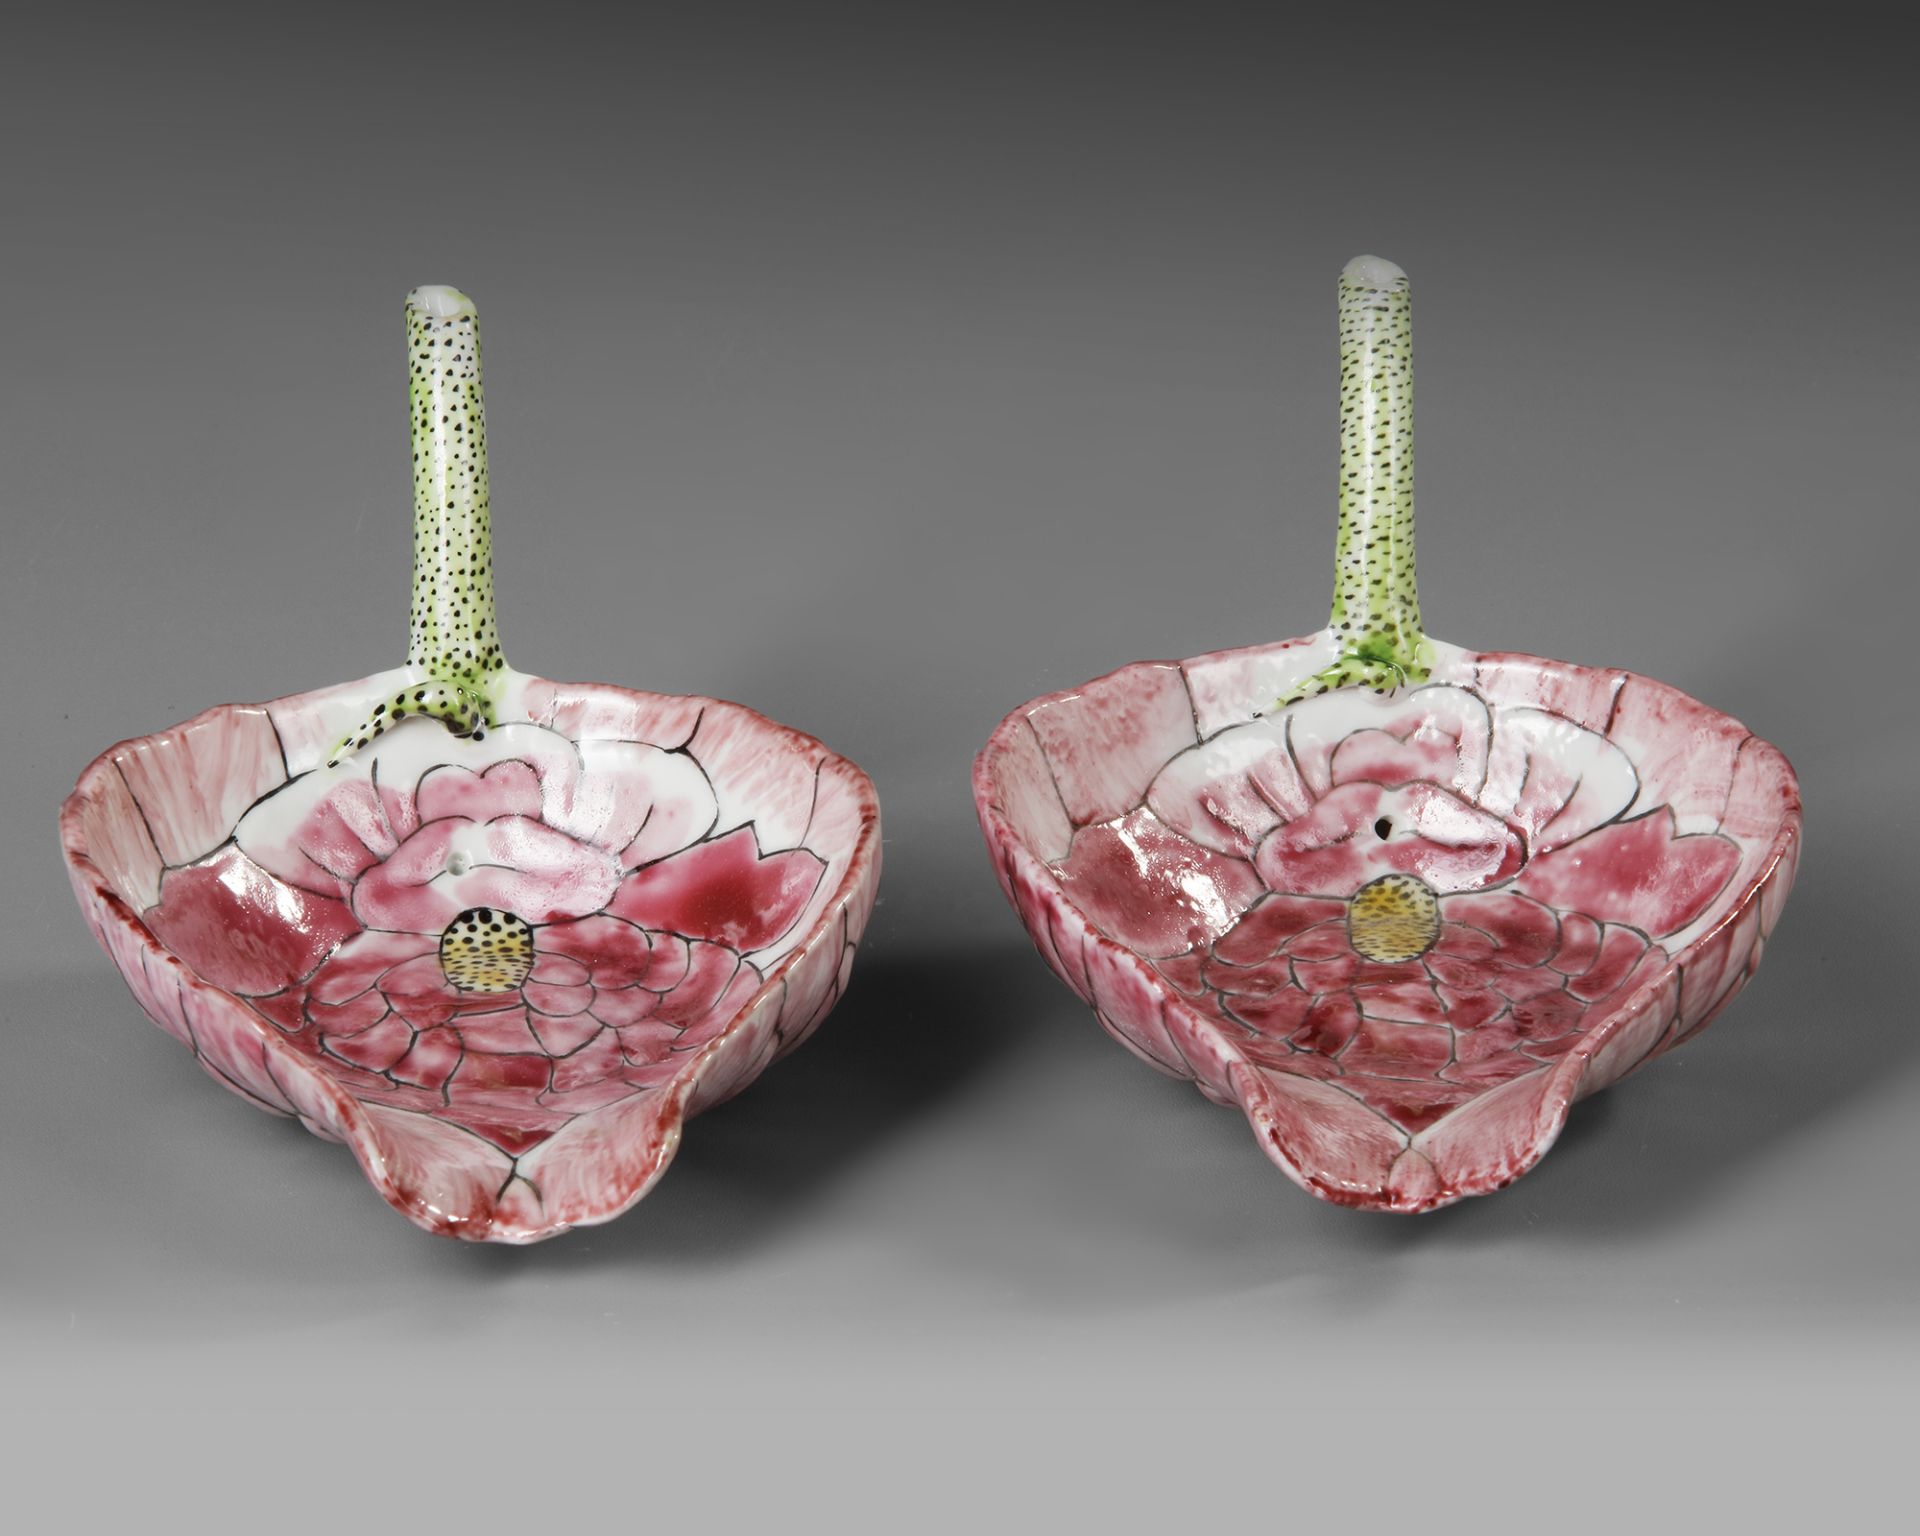 A PAIR OF CHINESE FAMILLE ROSE 'LOTUS' CUPS, 19TH-20TH CENTURY